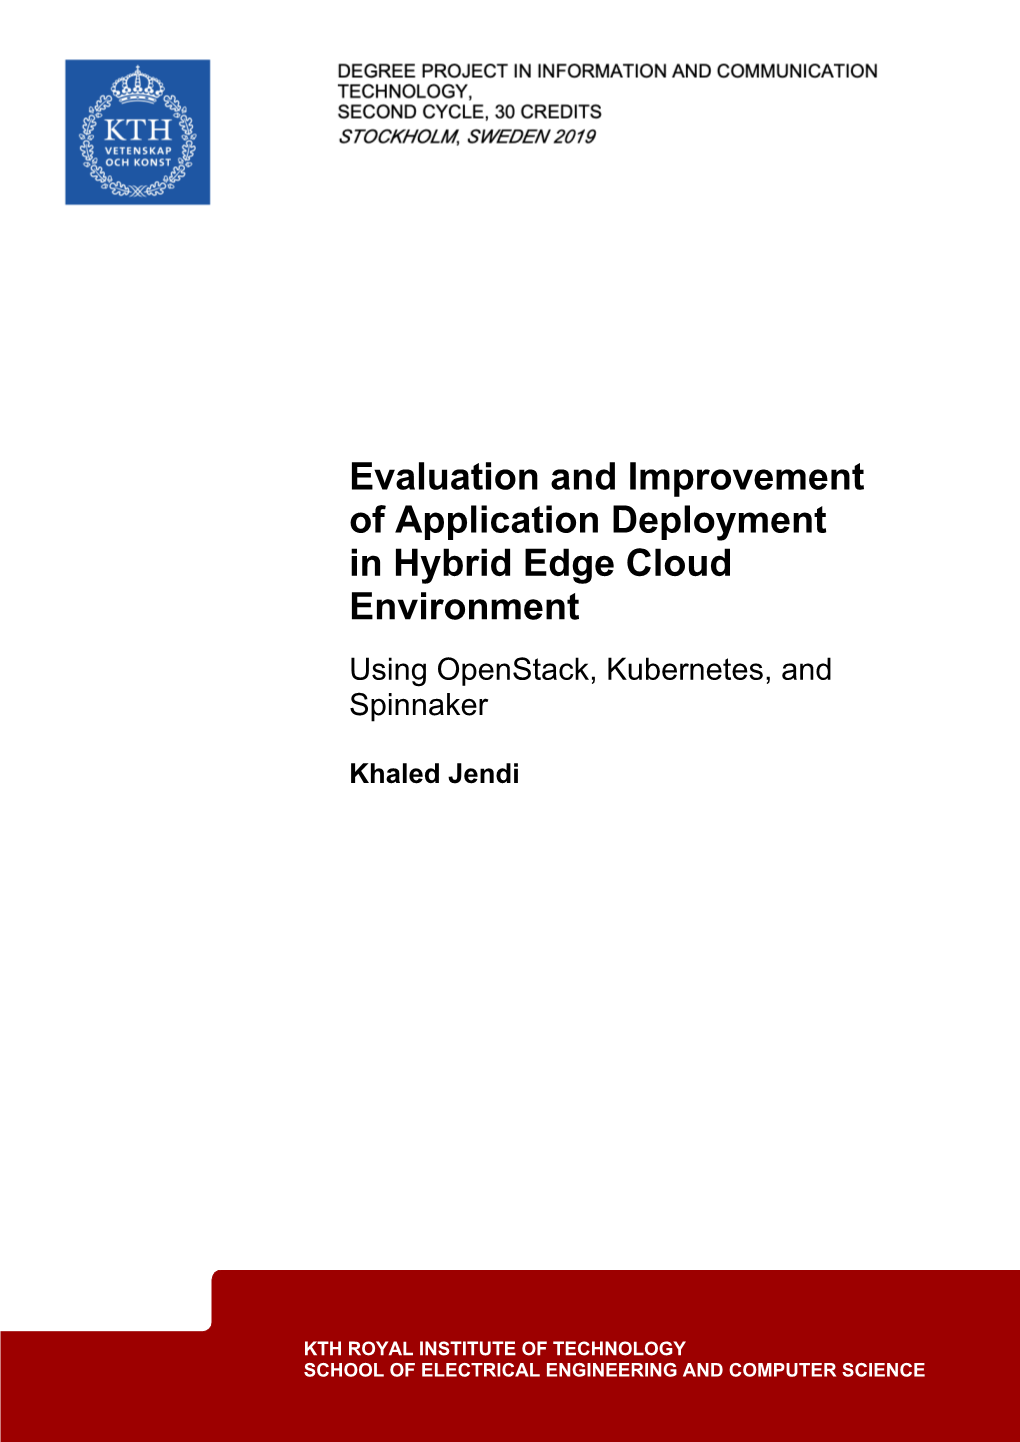 Evaluation and Improvement of Application Deployment in Hybrid Edge Cloud Environment